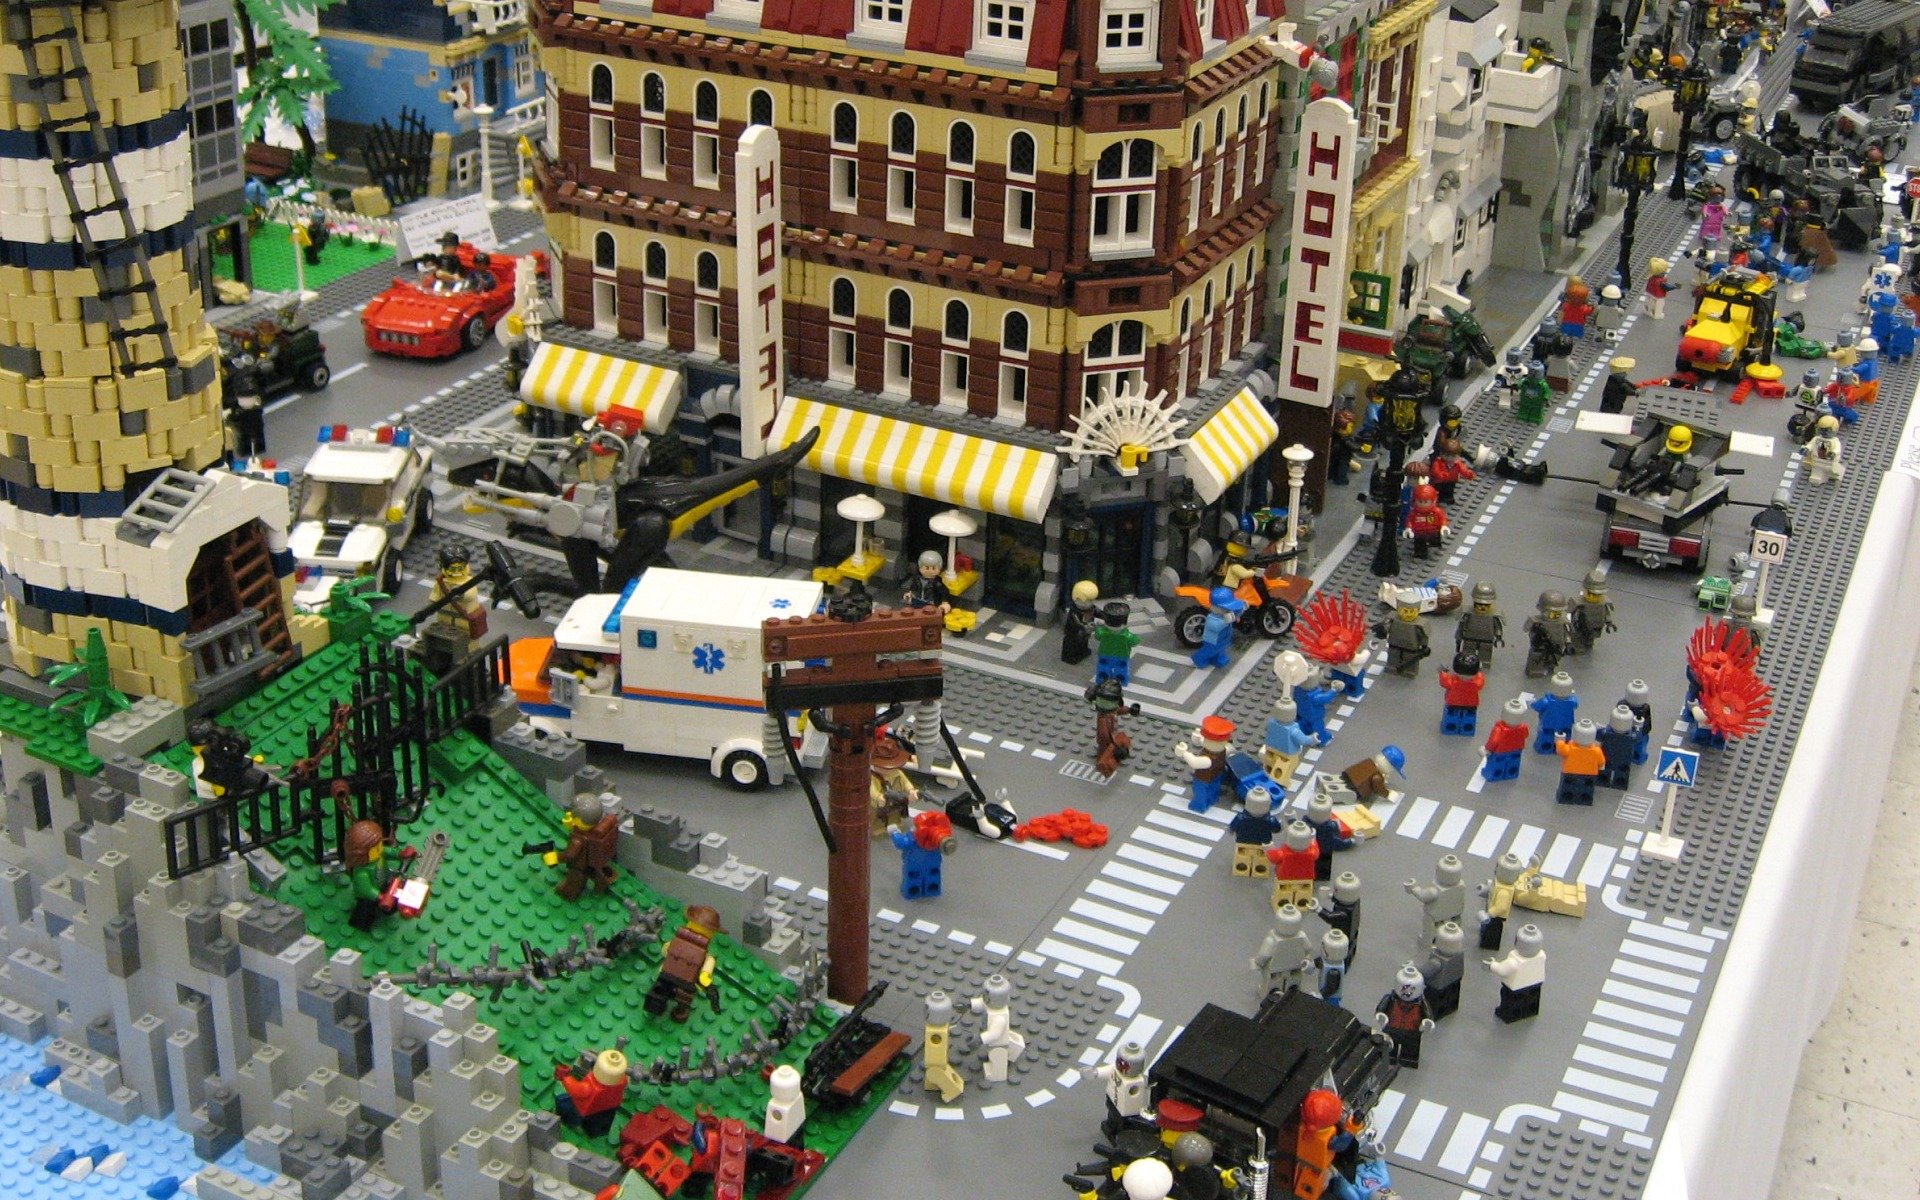 More information about "CSS Zombie Escape Event #149 - World of Lego"